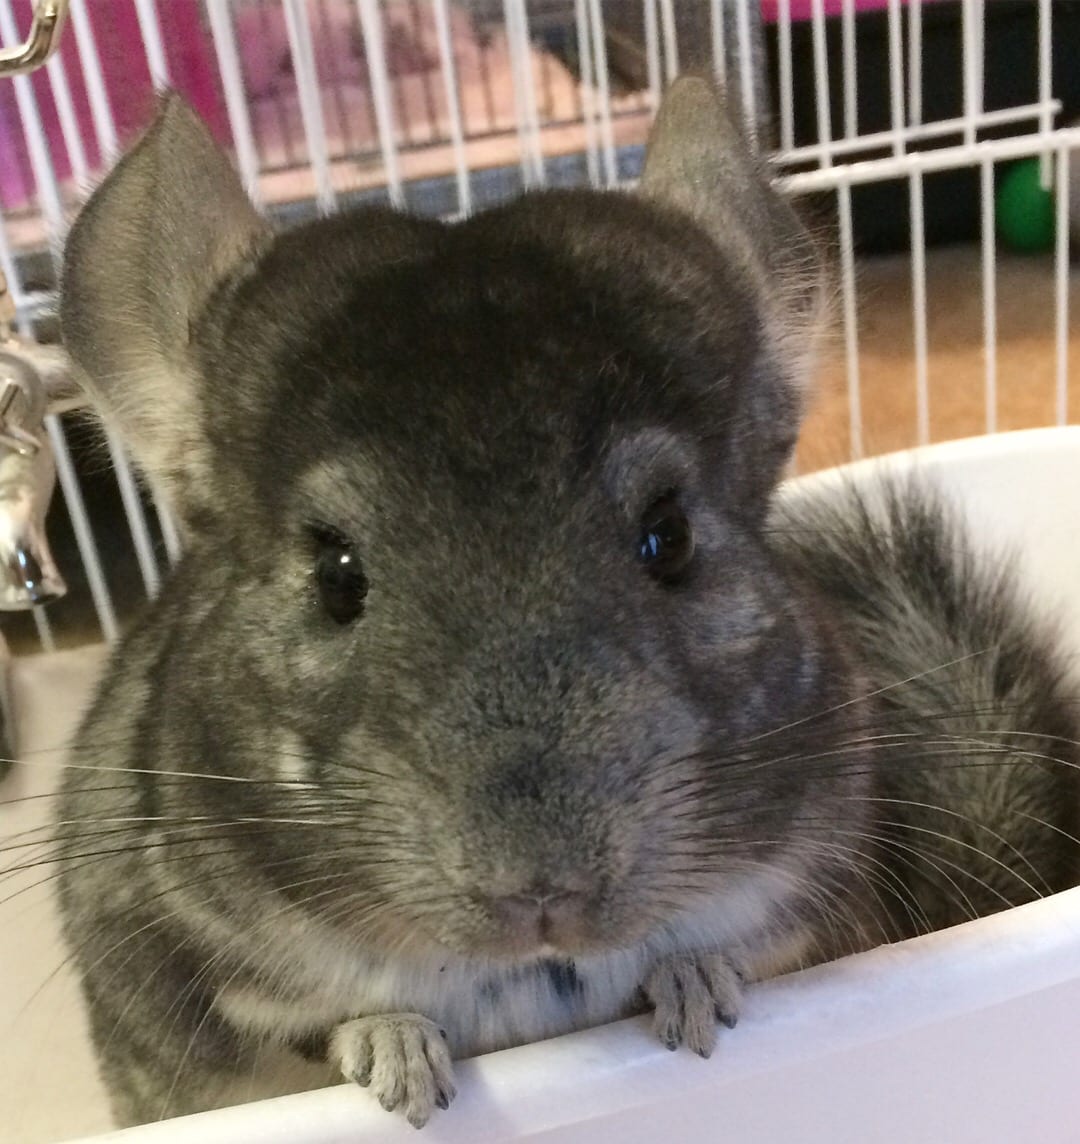 Penelope, a standard grey chinchilla, looks into the camera just after a dust bath, showing off her newly clean fur.